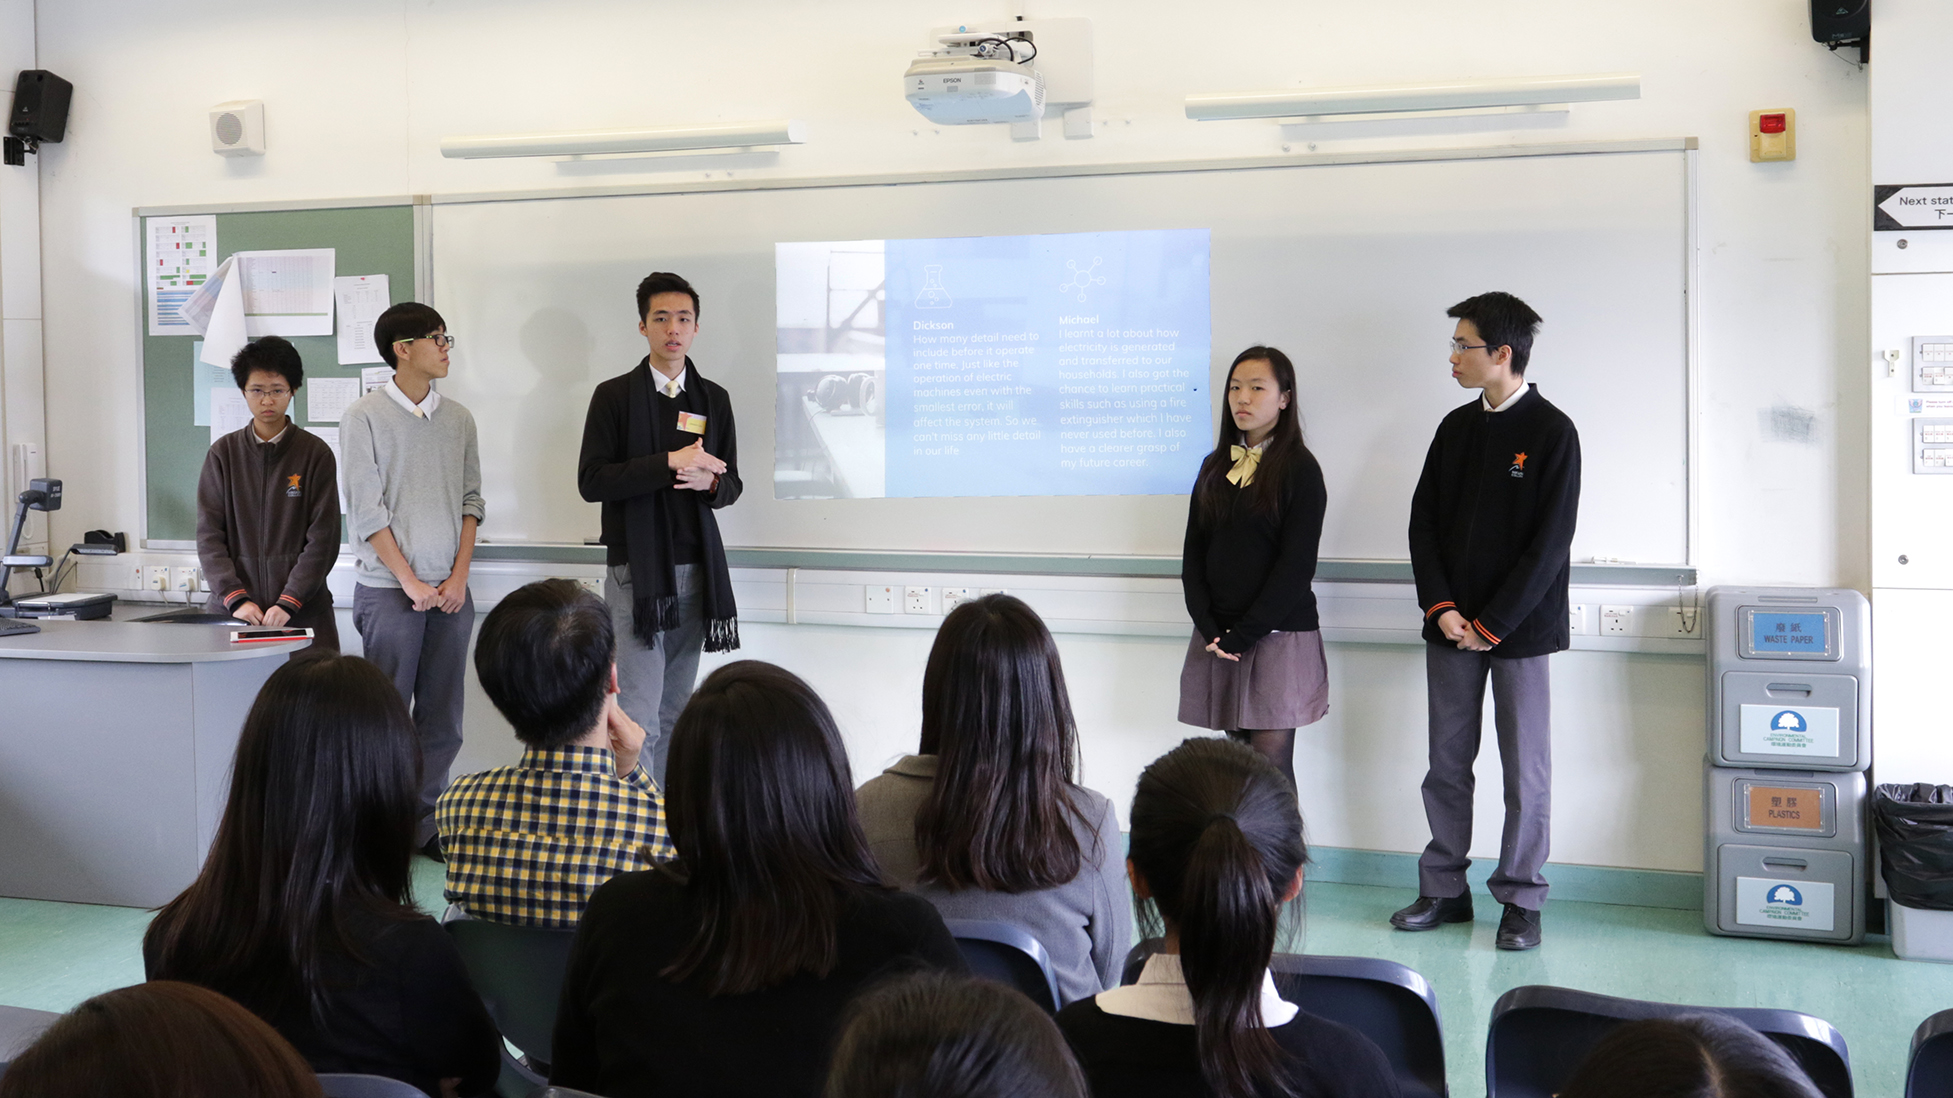 Students wrapped up the programme with a presentation summarizing their progress to their mentors and the S4 students.